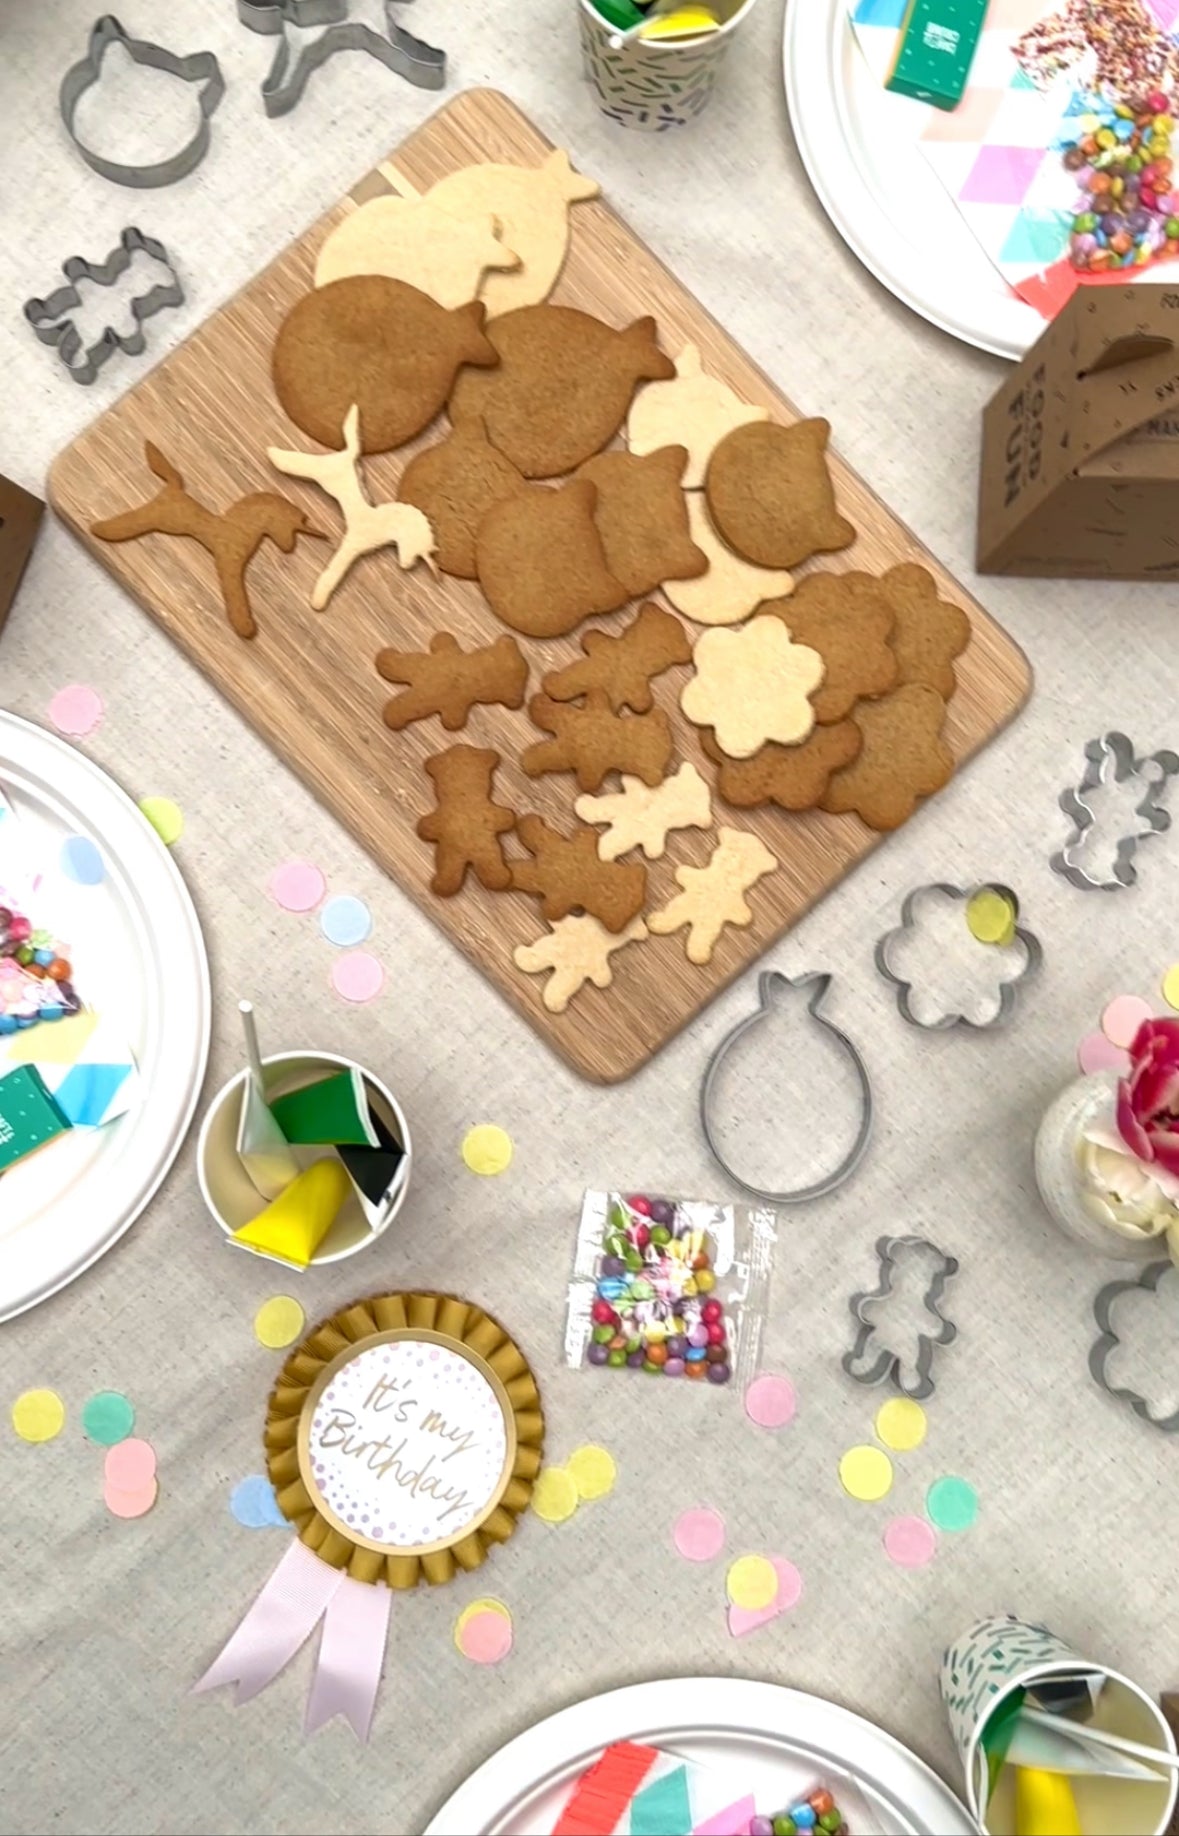 How to host a cookie decorating party at home